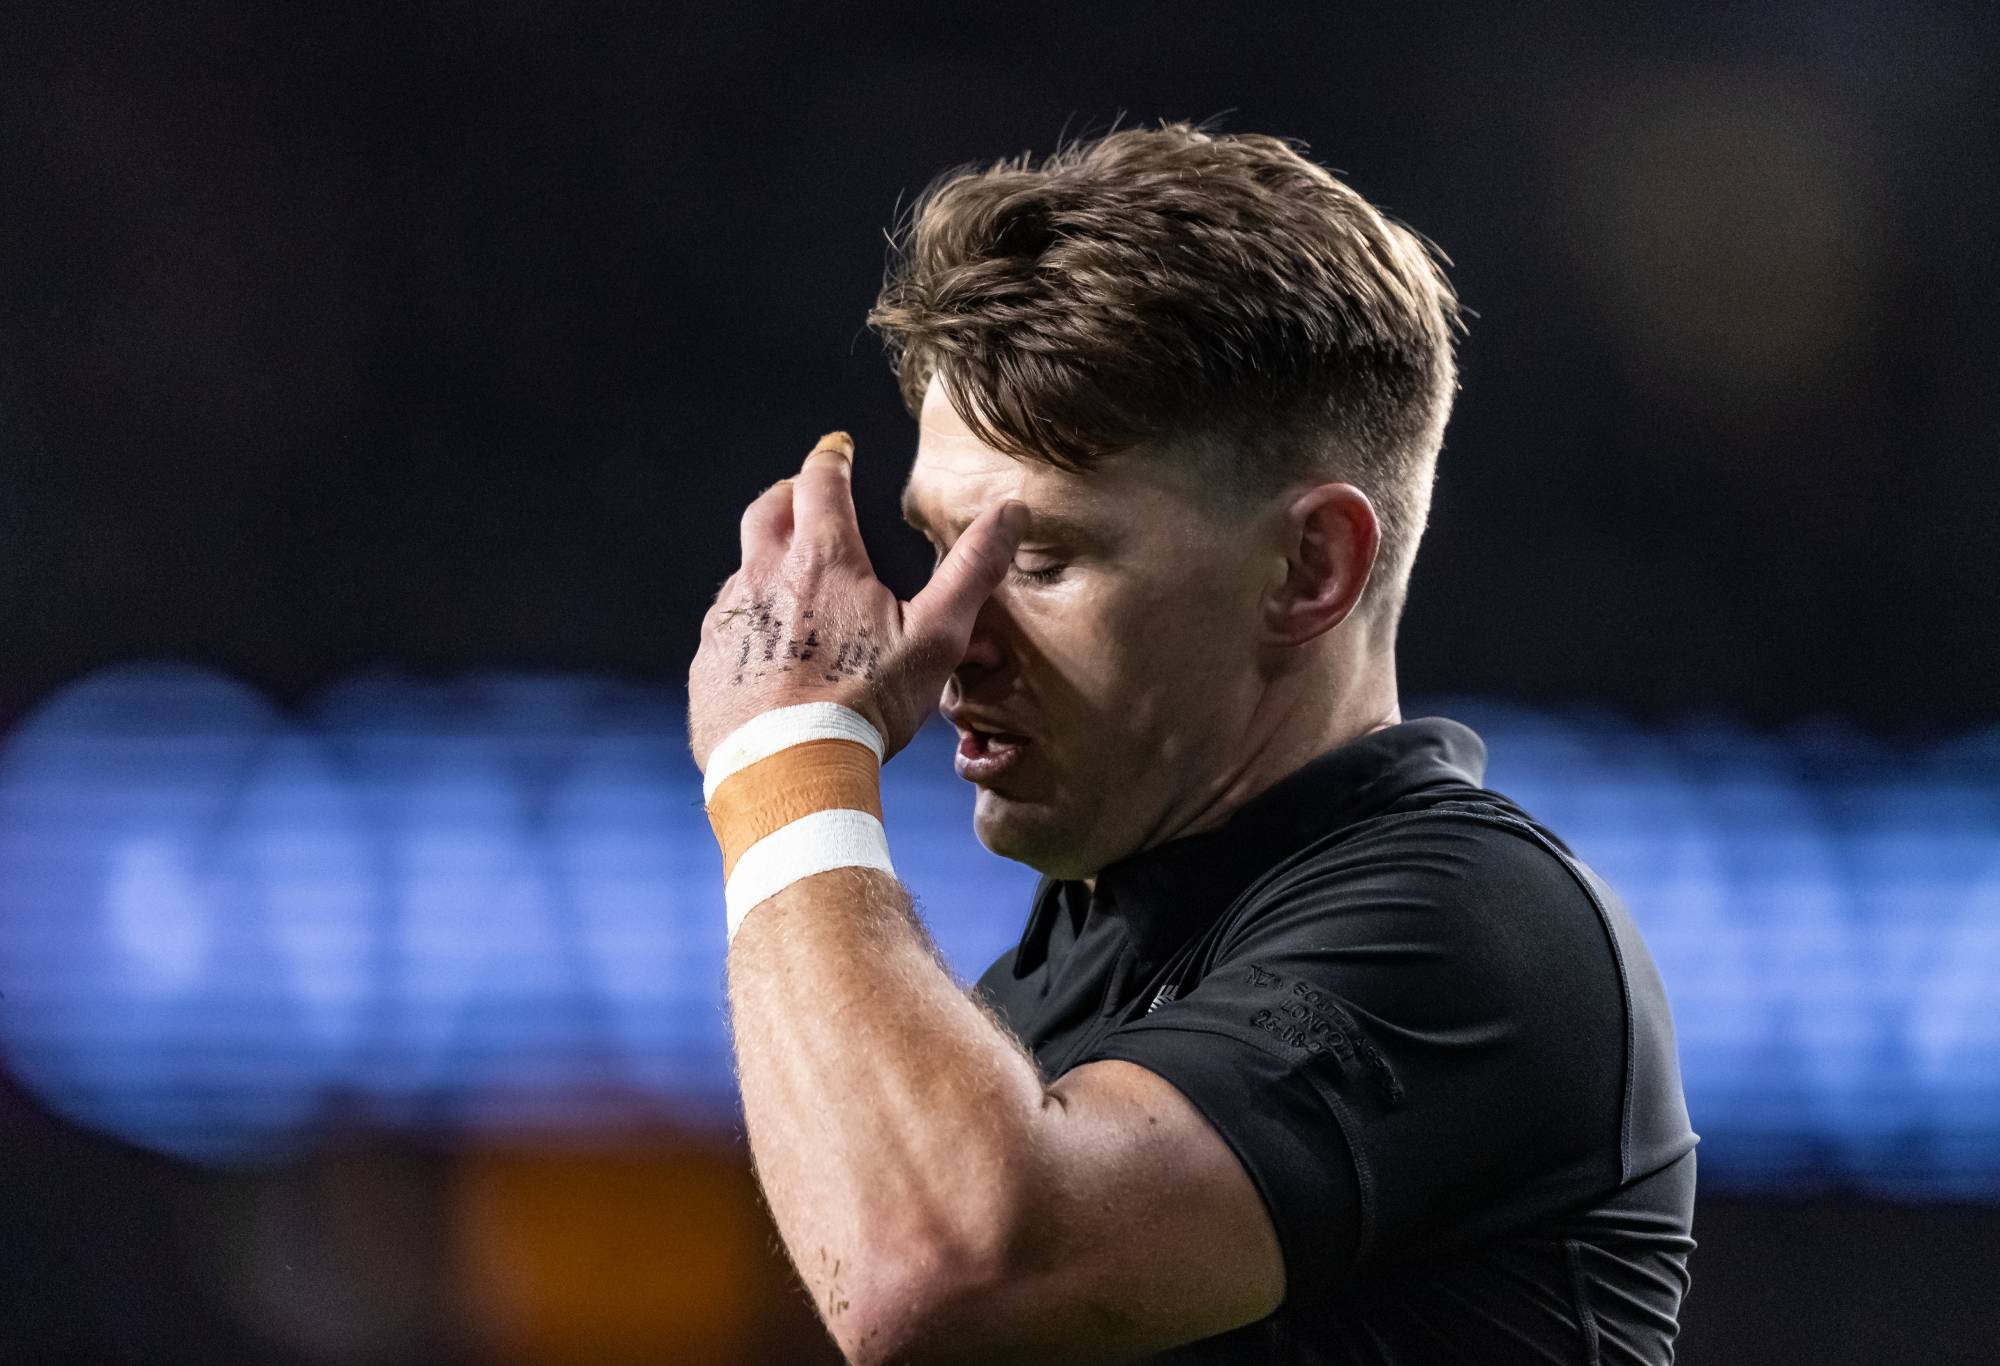 Beauden Barrett of New Zealand looks on during the Summer International match between the New Zealand All Blacks and South Africa at Twickenham Stadium on August 25, 2023 in London, England. (Photo by Andrew Kearns - CameraSport via Getty Images)